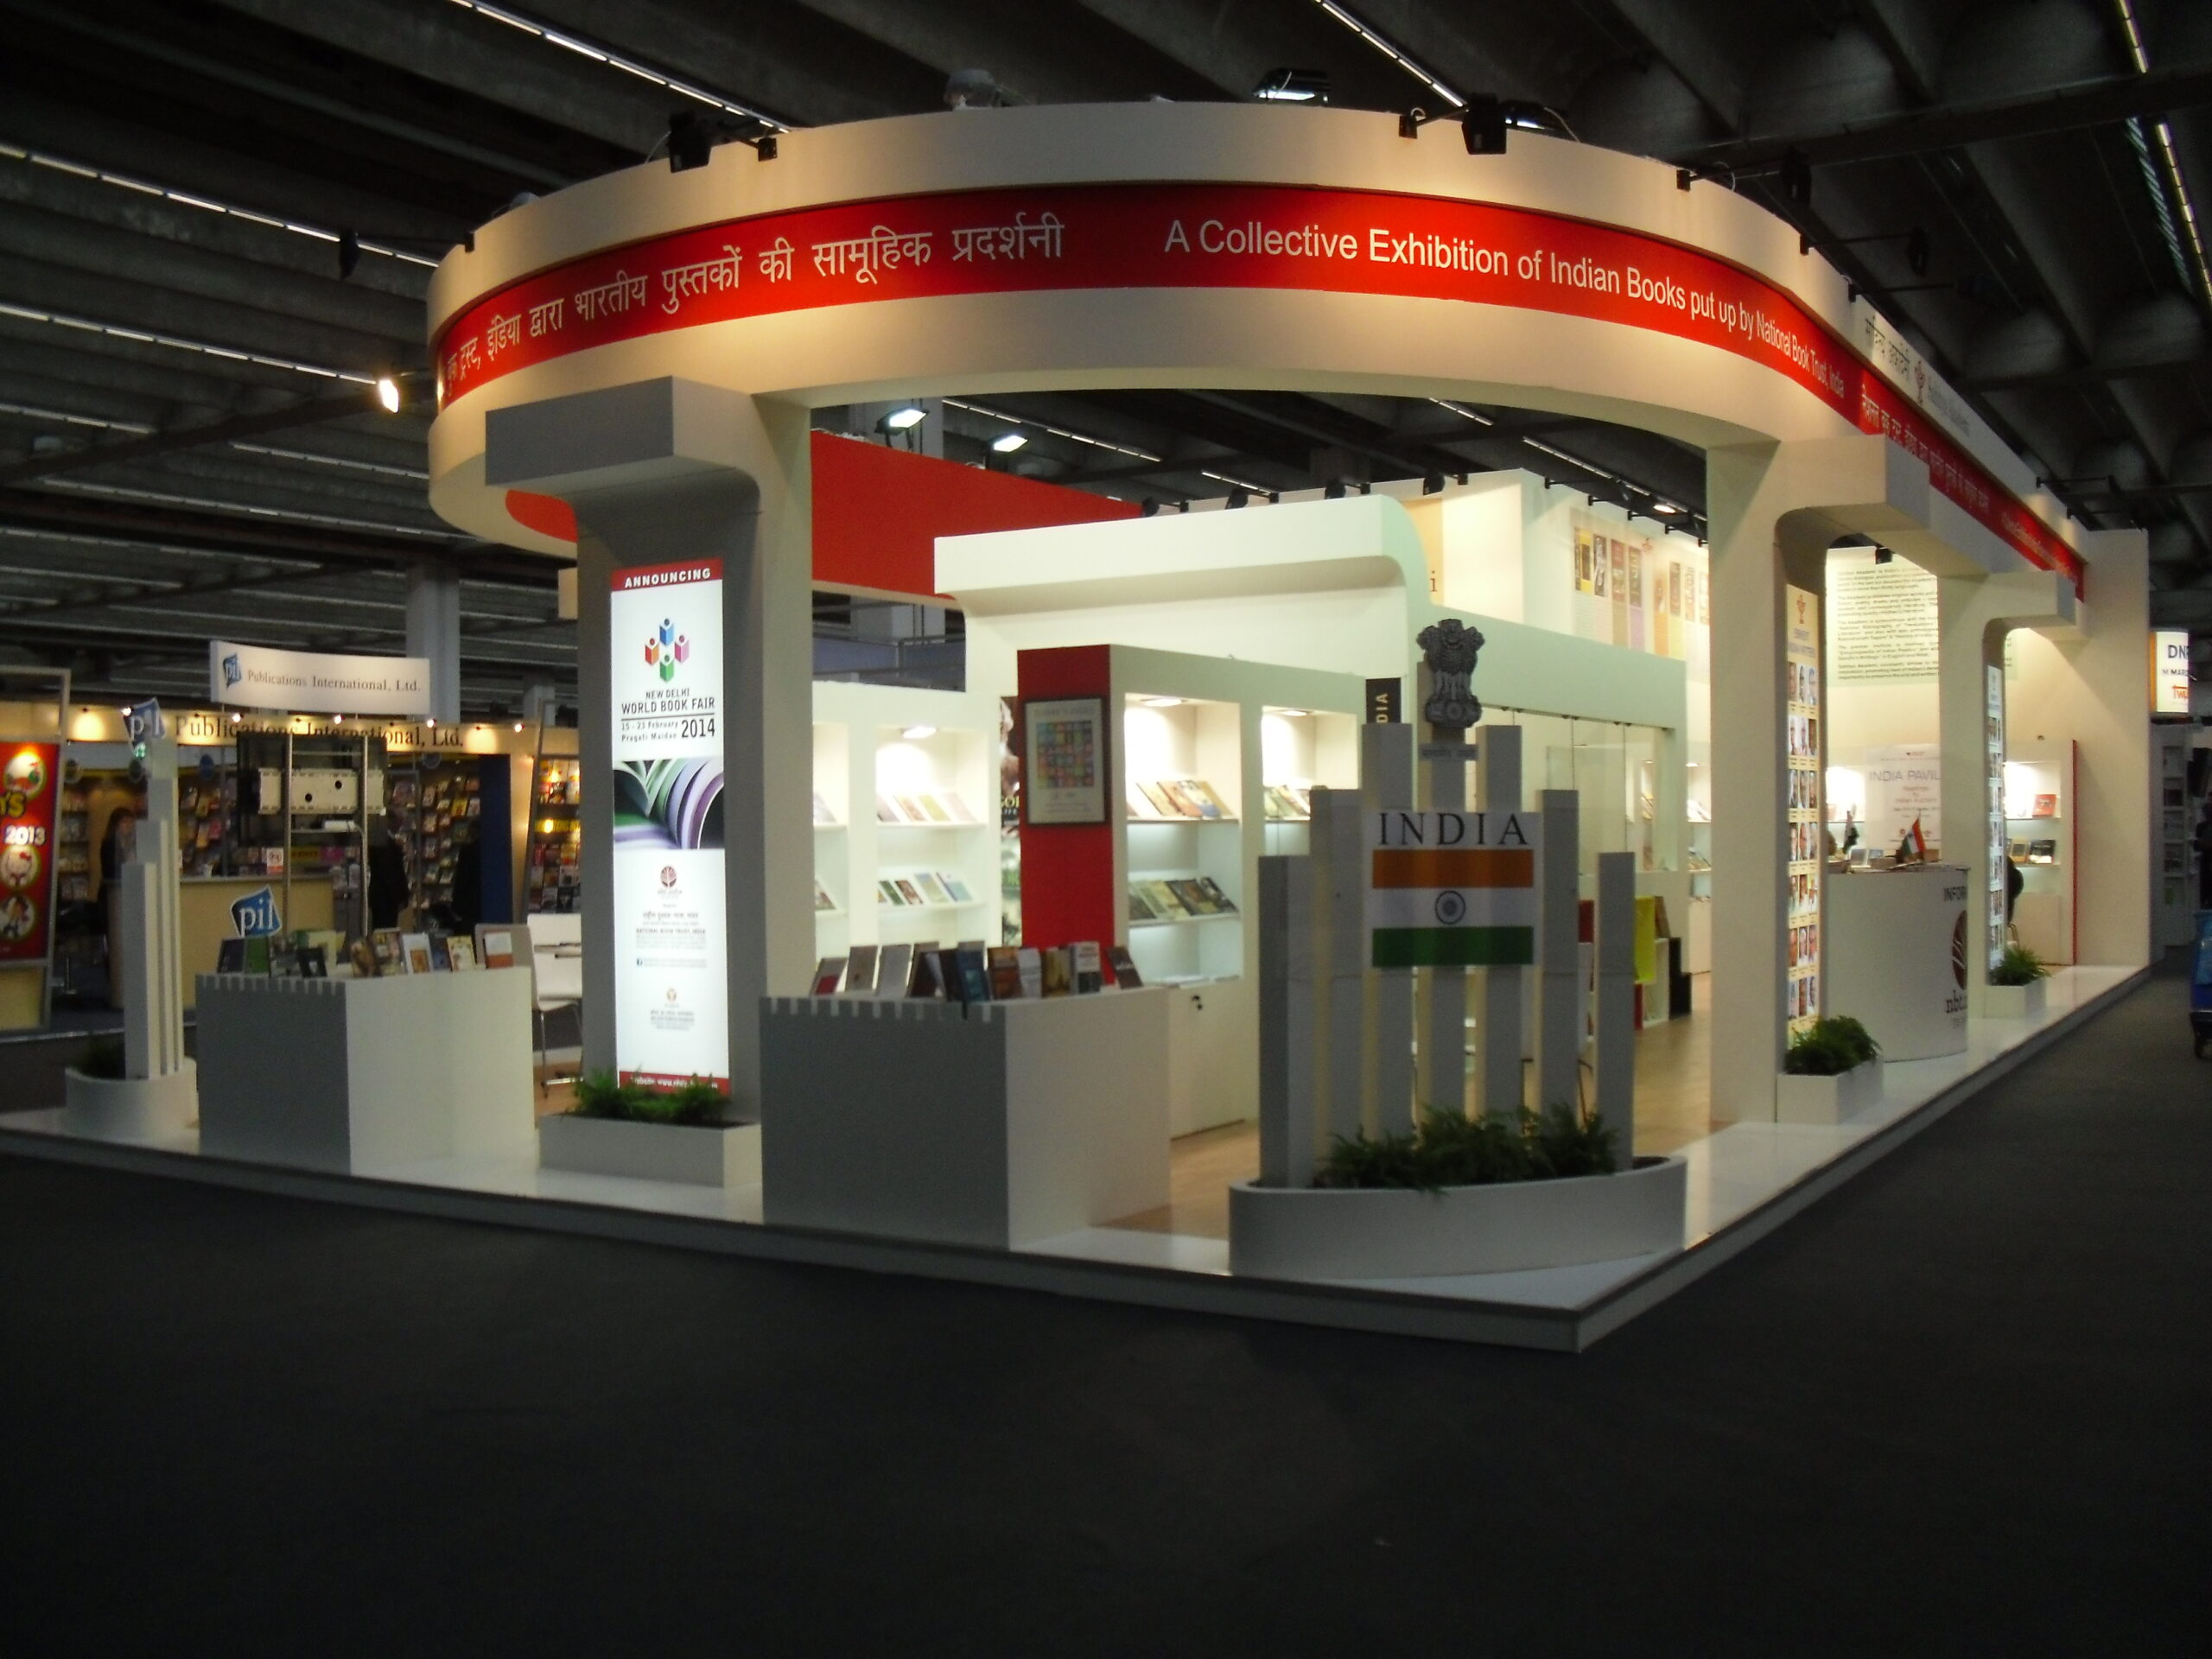 Exhibition Stand Builders in London